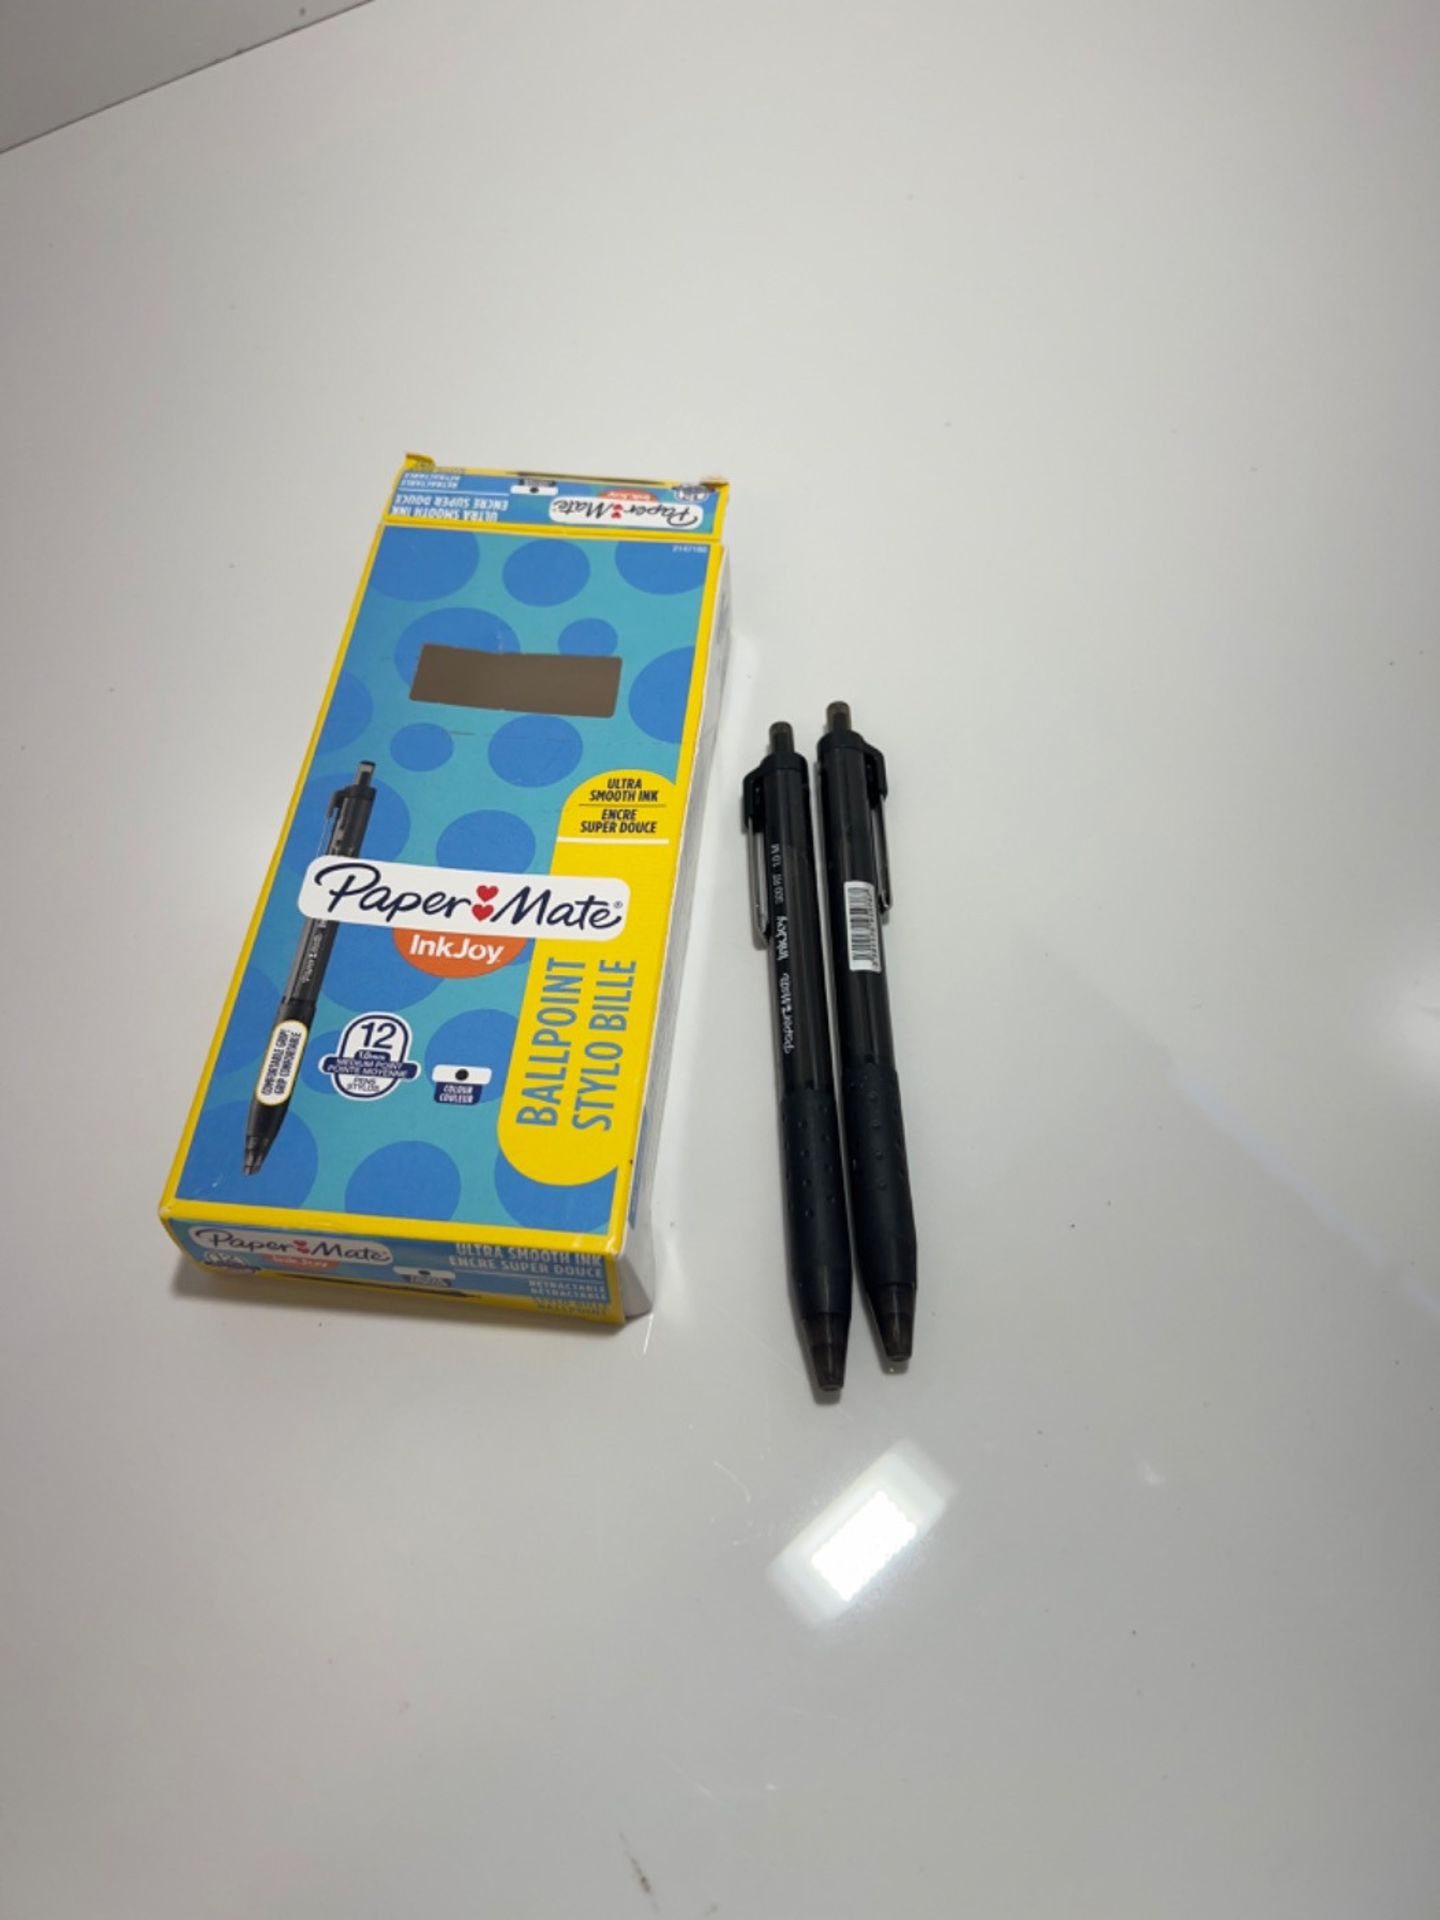 Paper Mate InkJoy 300RT Retractable Ballpoint Pens | Medium Point (1.0 mm) | Black | 12 Count - Image 2 of 2